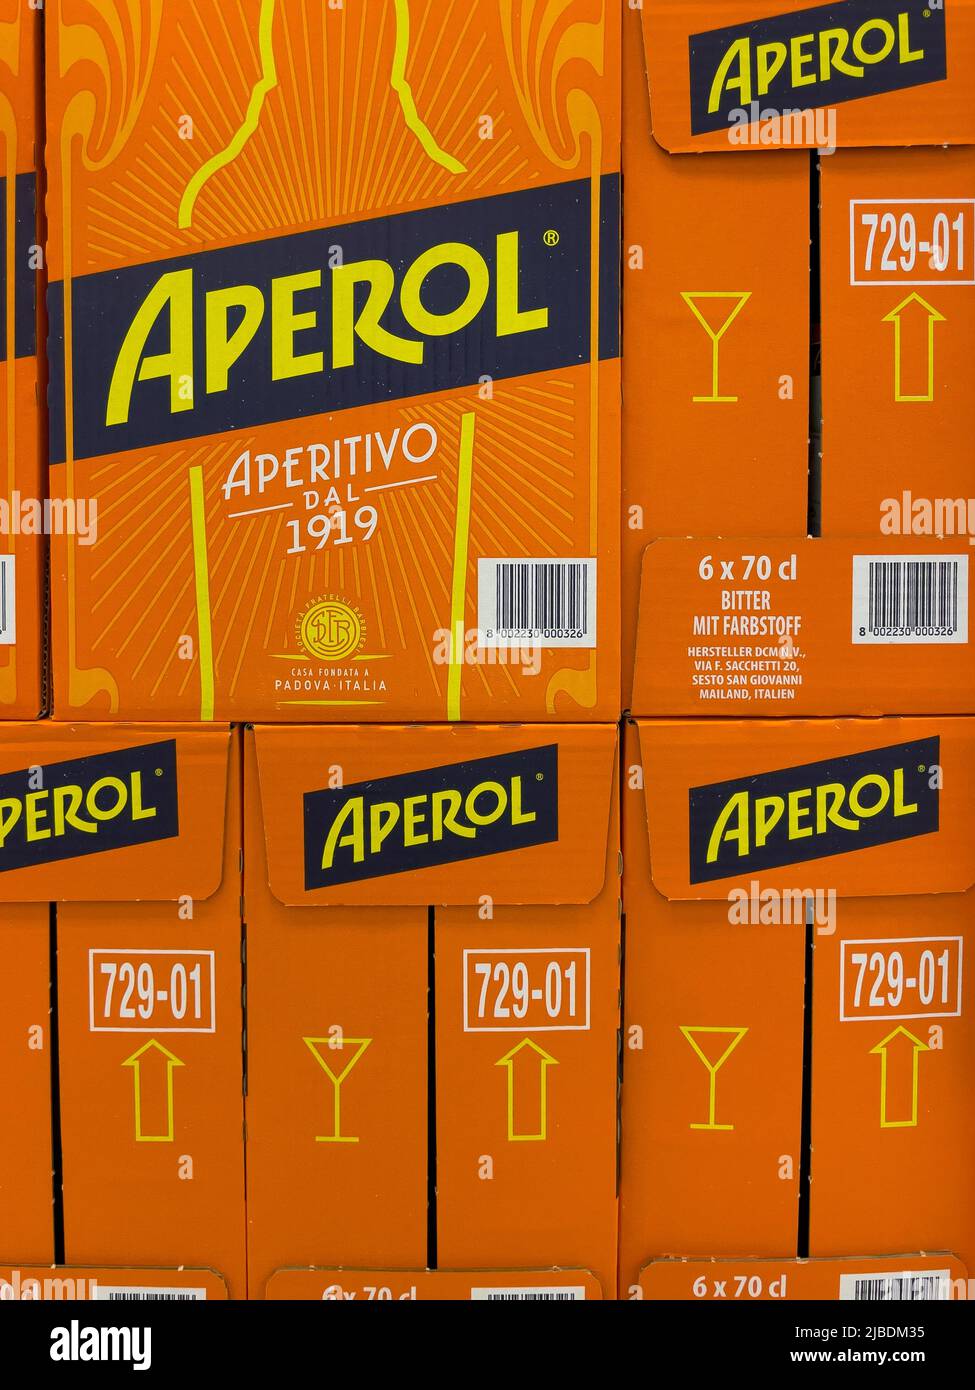 Nuremberg, Germany - June 4, 2022: Aperol is an italian bitte since 1919. Now produced by the Campari Group. Found in a Supermarket. Stock Photo